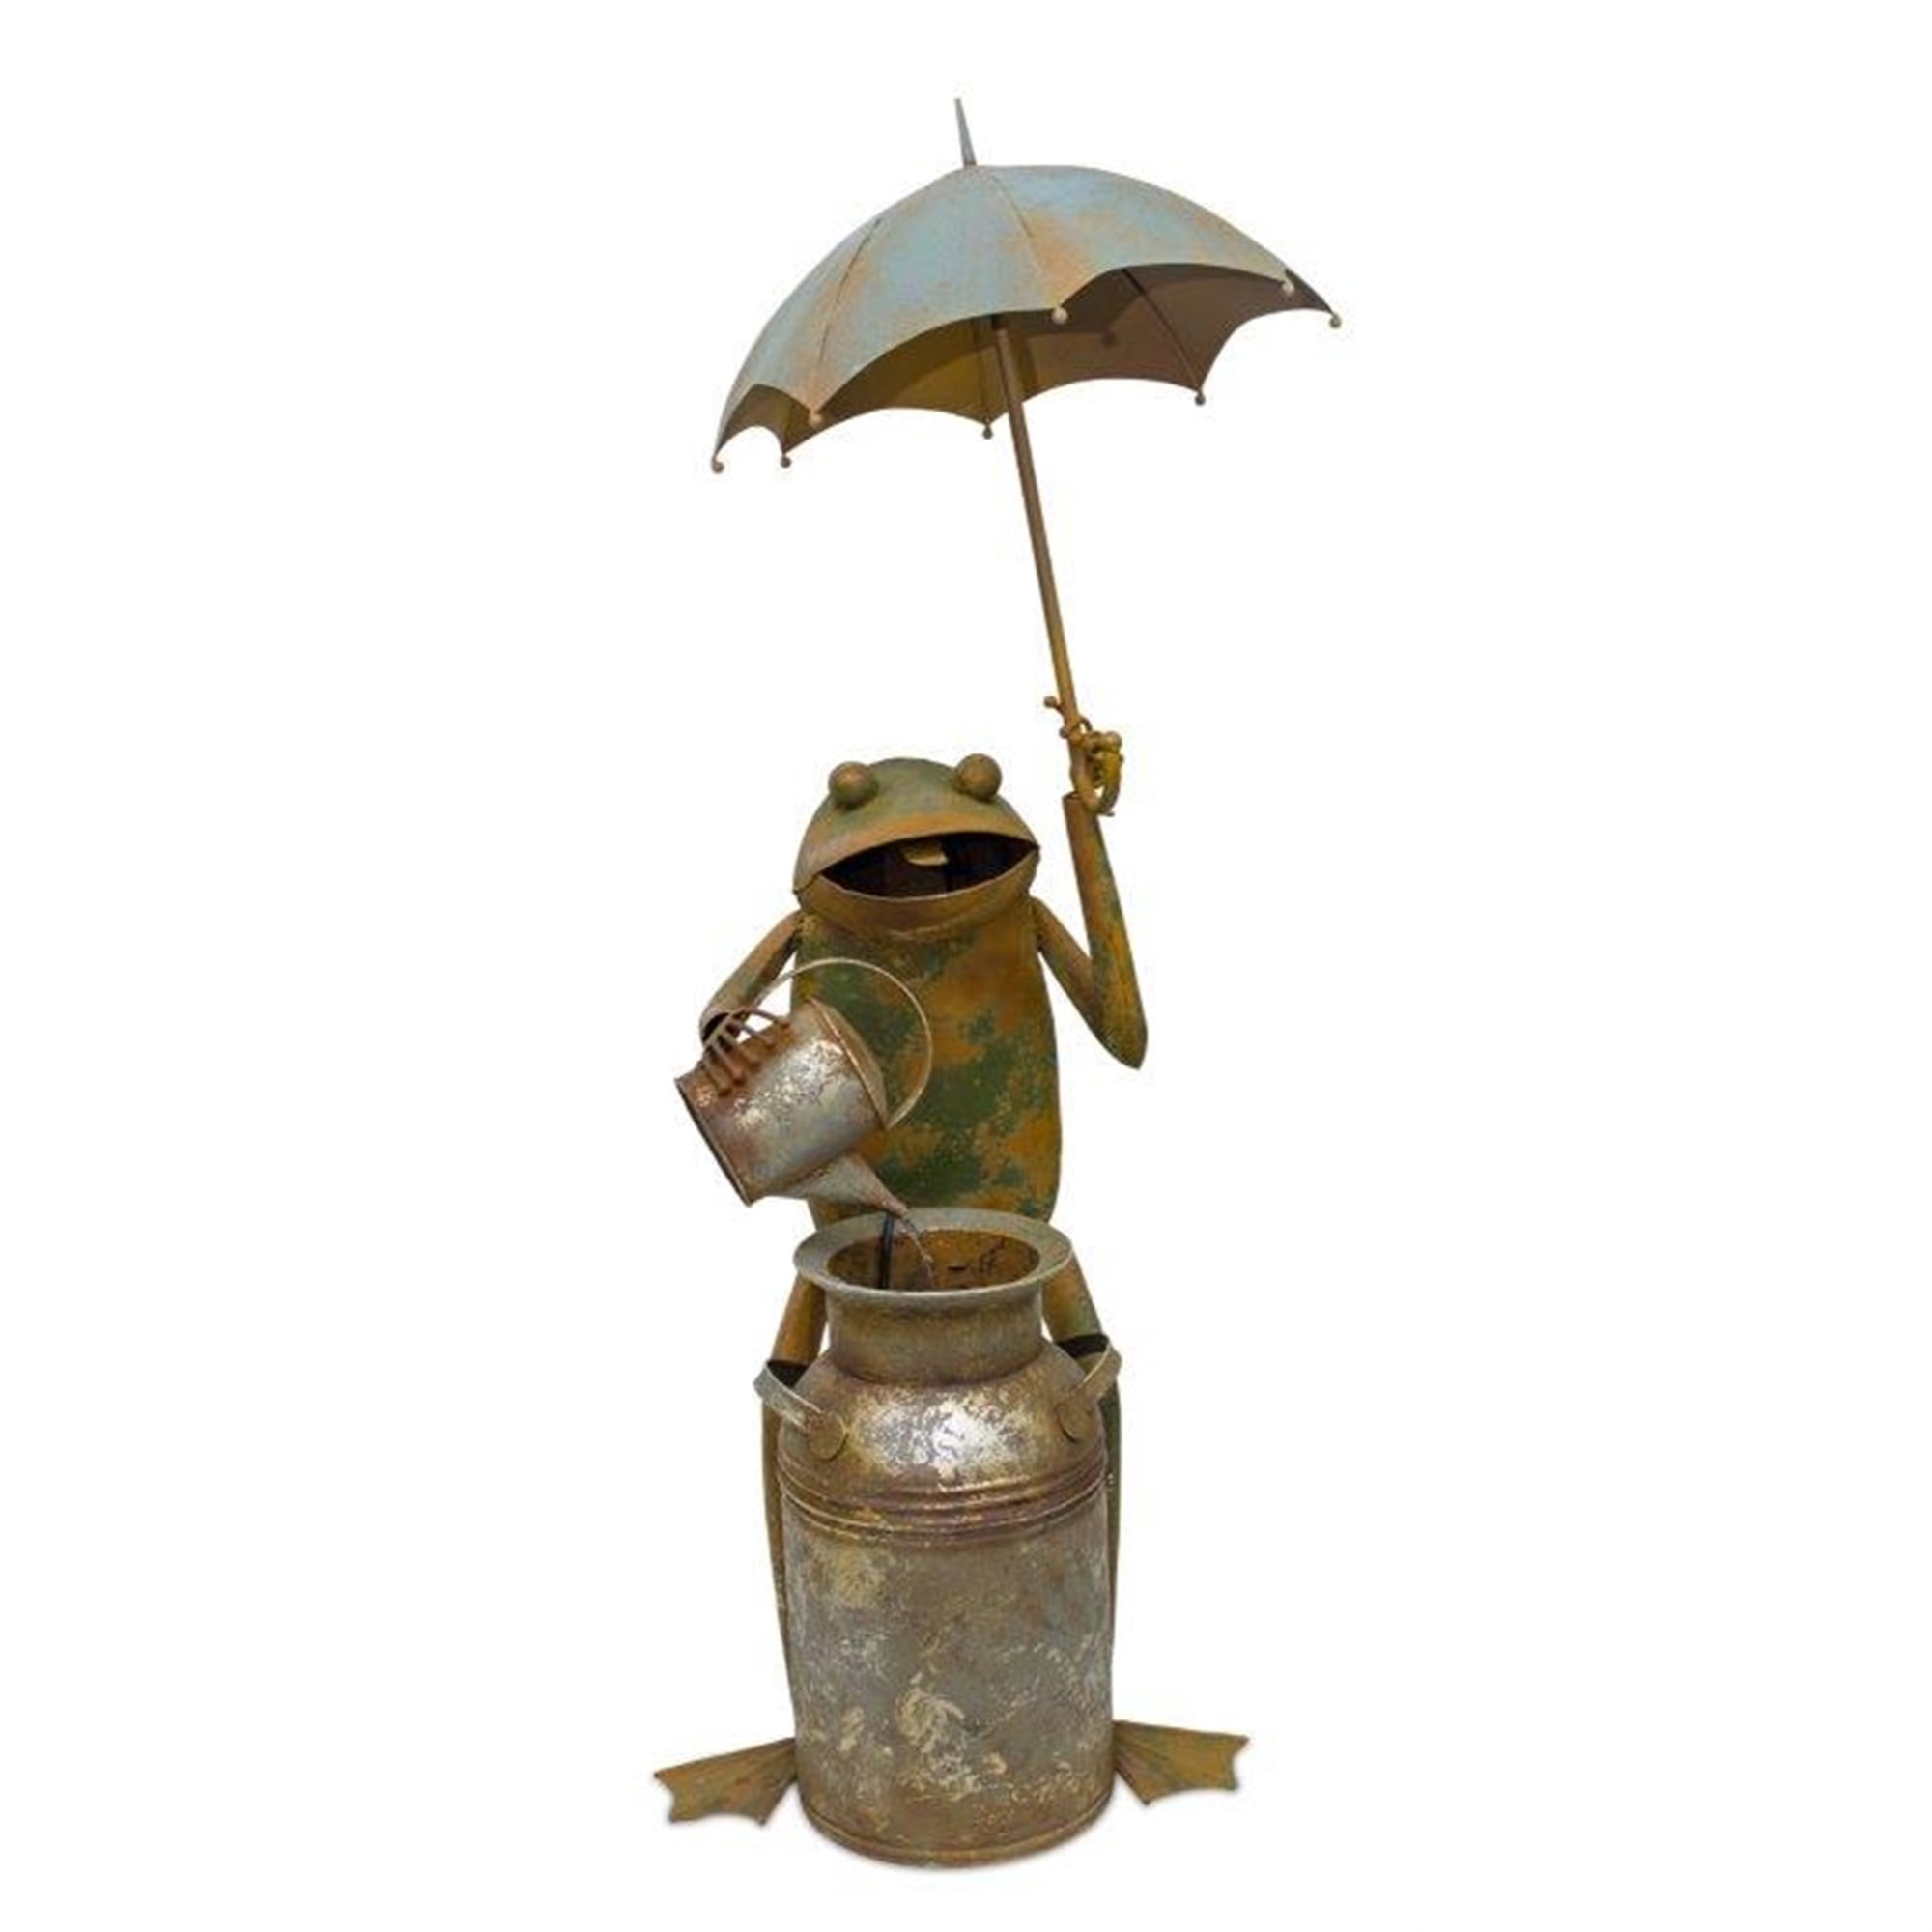 Frog with Umbrella Fountain 22"L x 53.75"H Iron